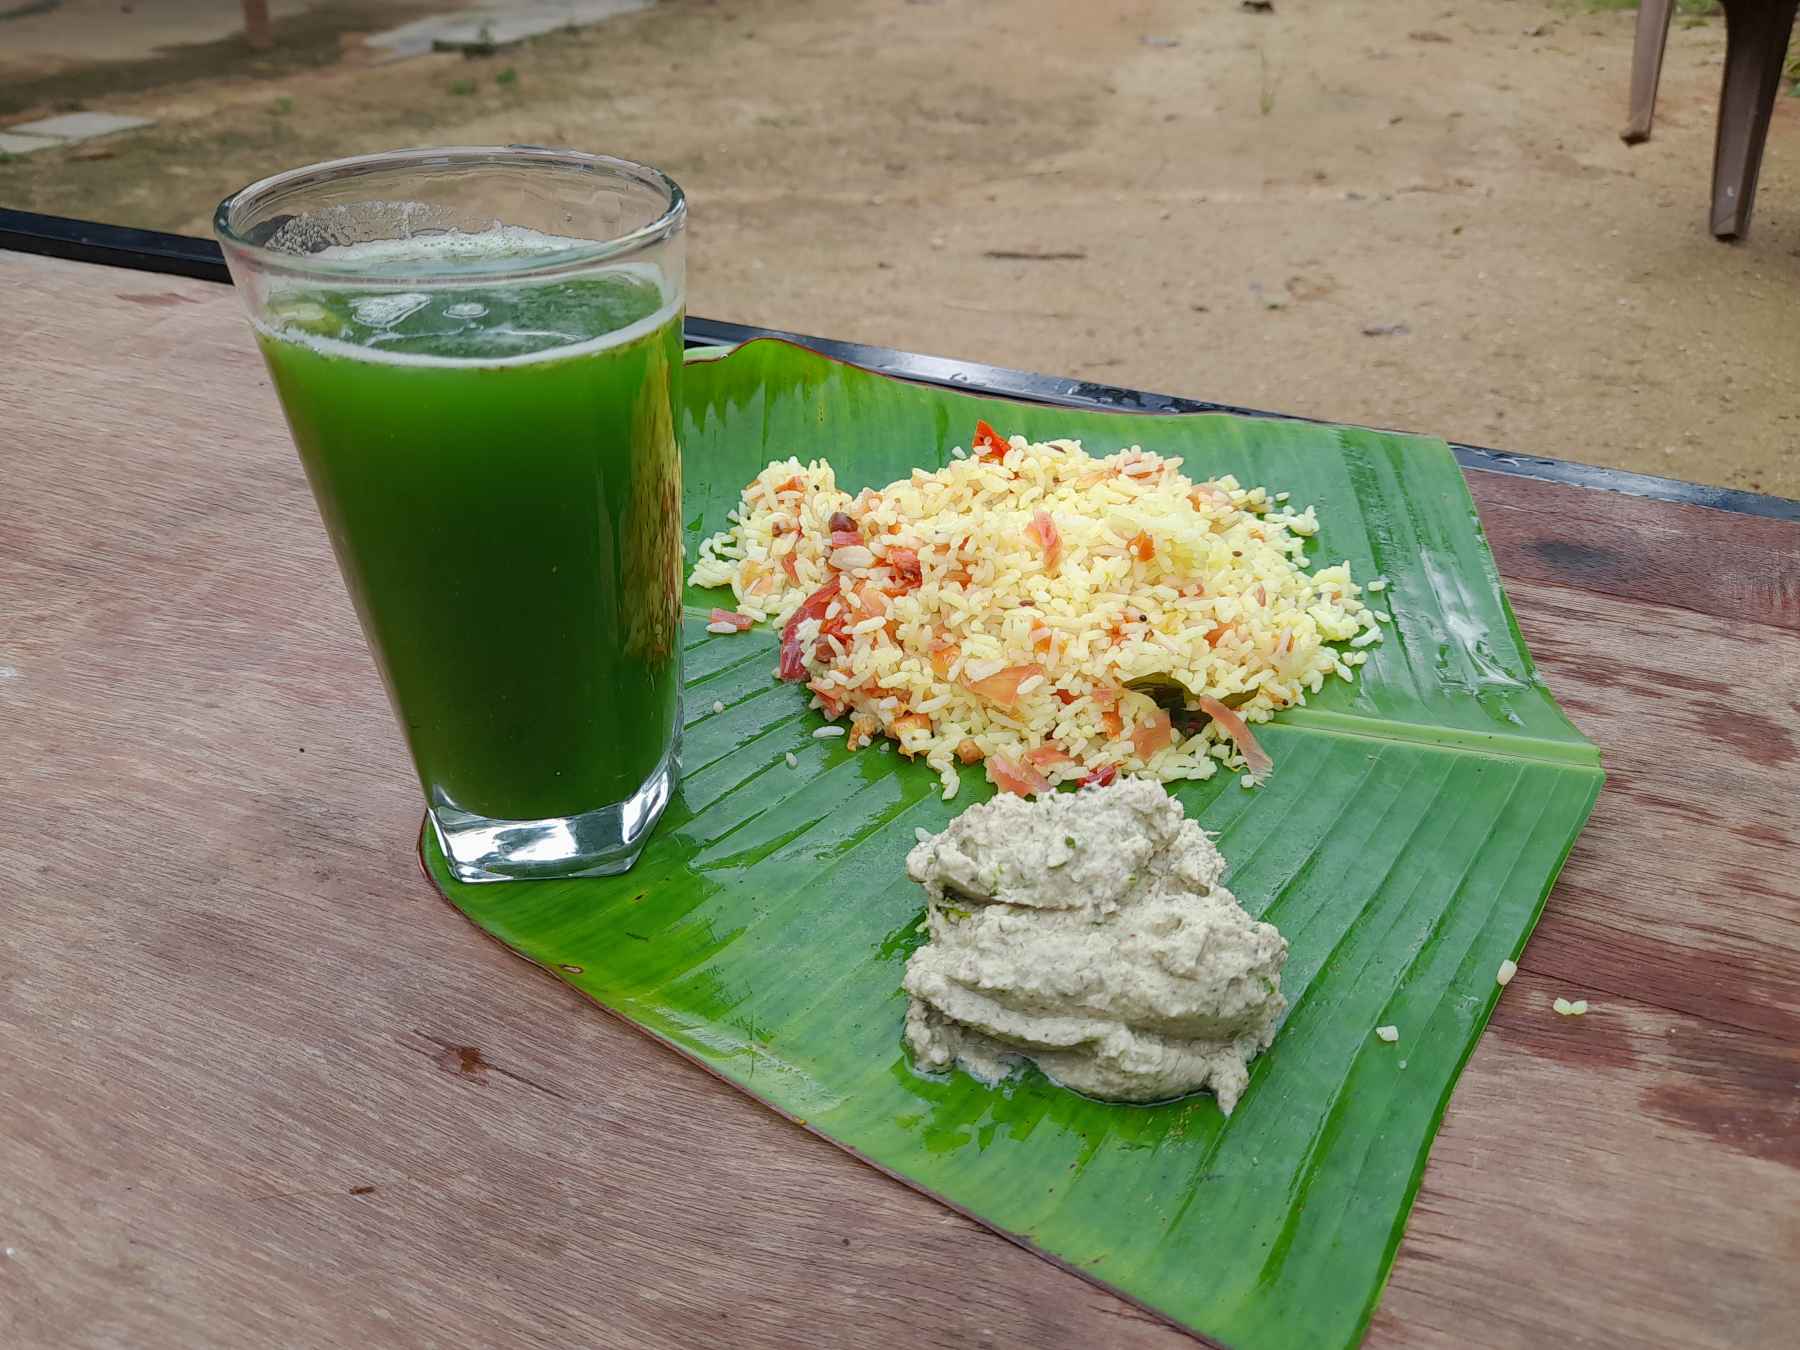 A simple meal served on a banana leaf at the farmstay